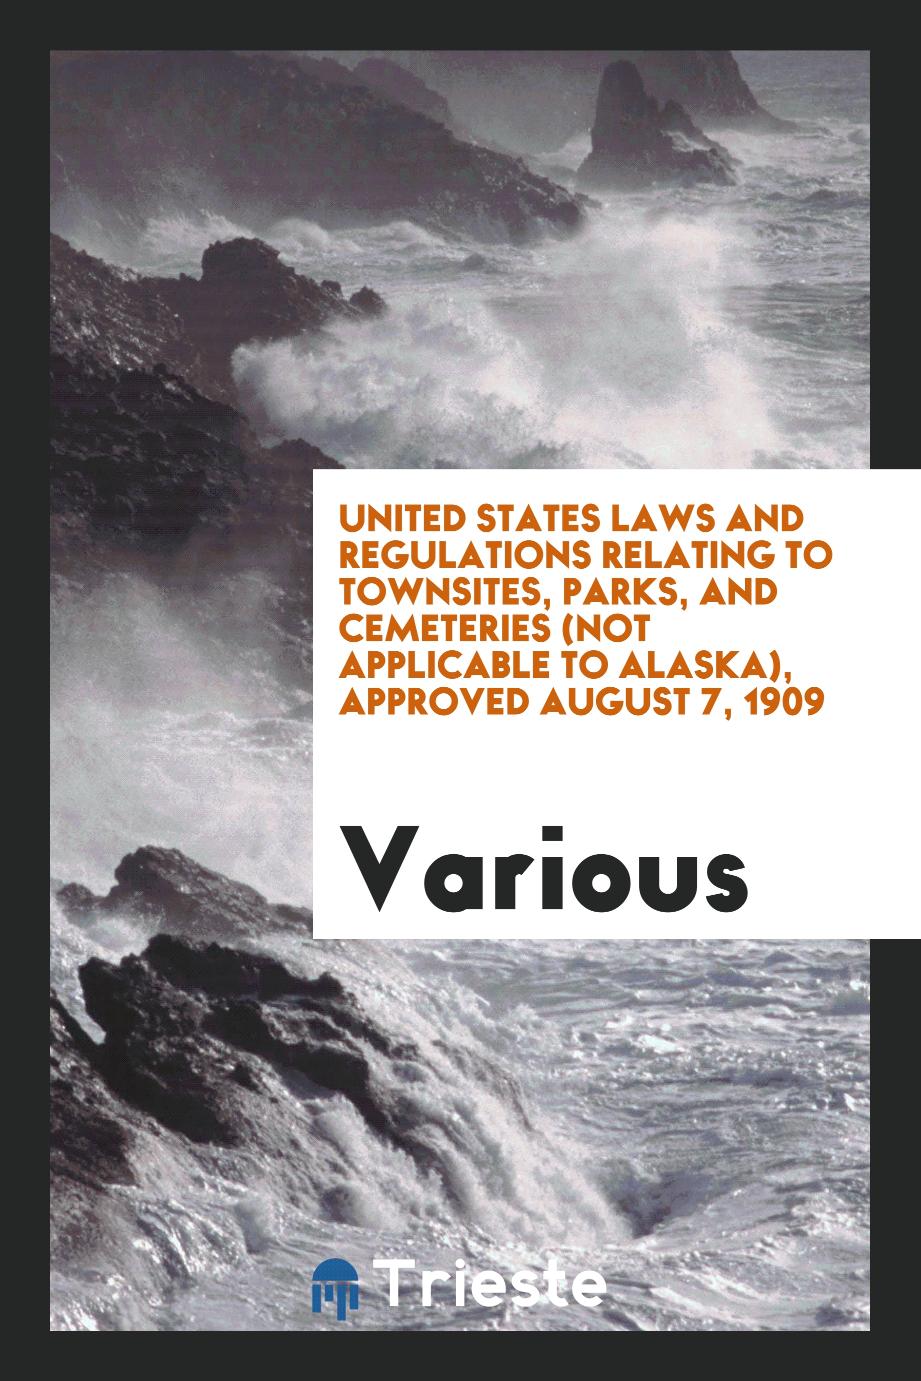 United States laws and regulations relating to townsites, parks, and cemeteries (not applicable to Alaska), Approved August 7, 1909